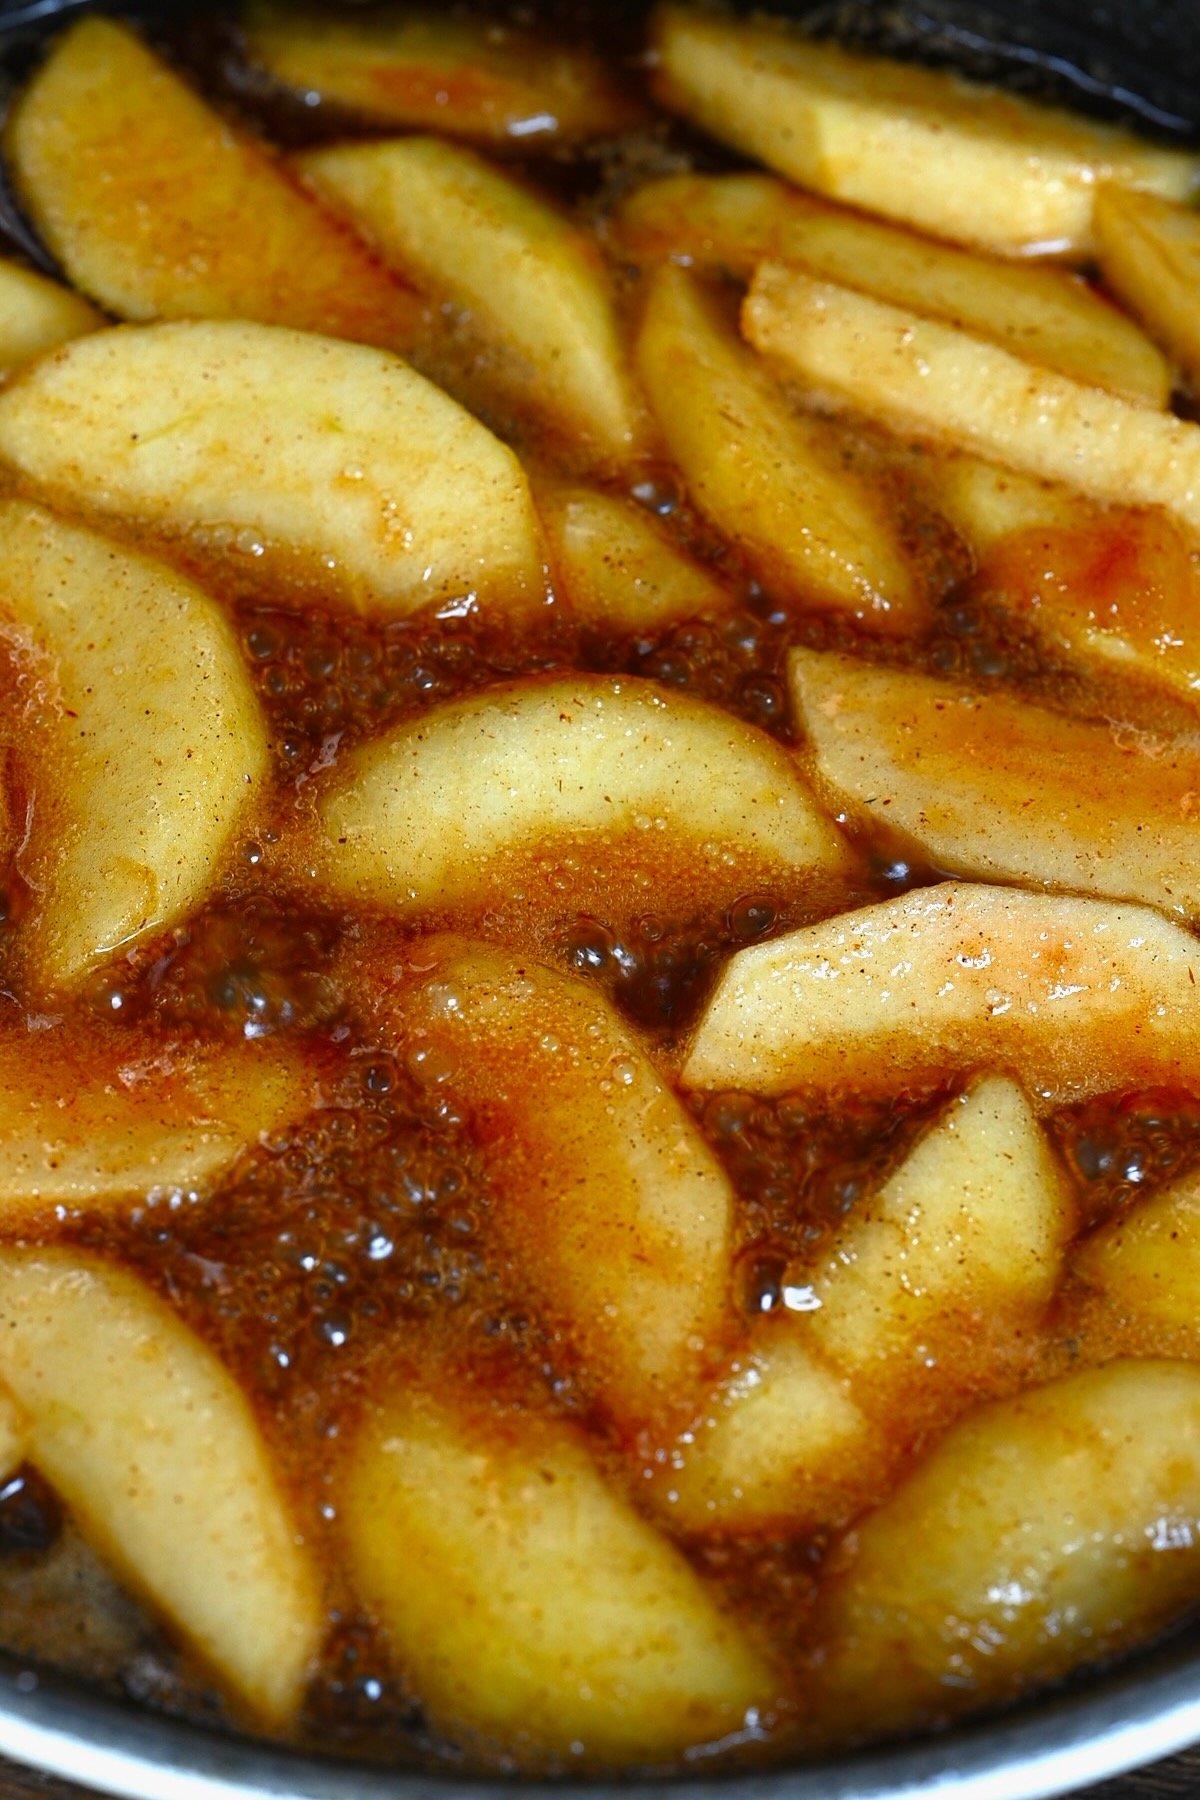 A close up of fried apples in a pan